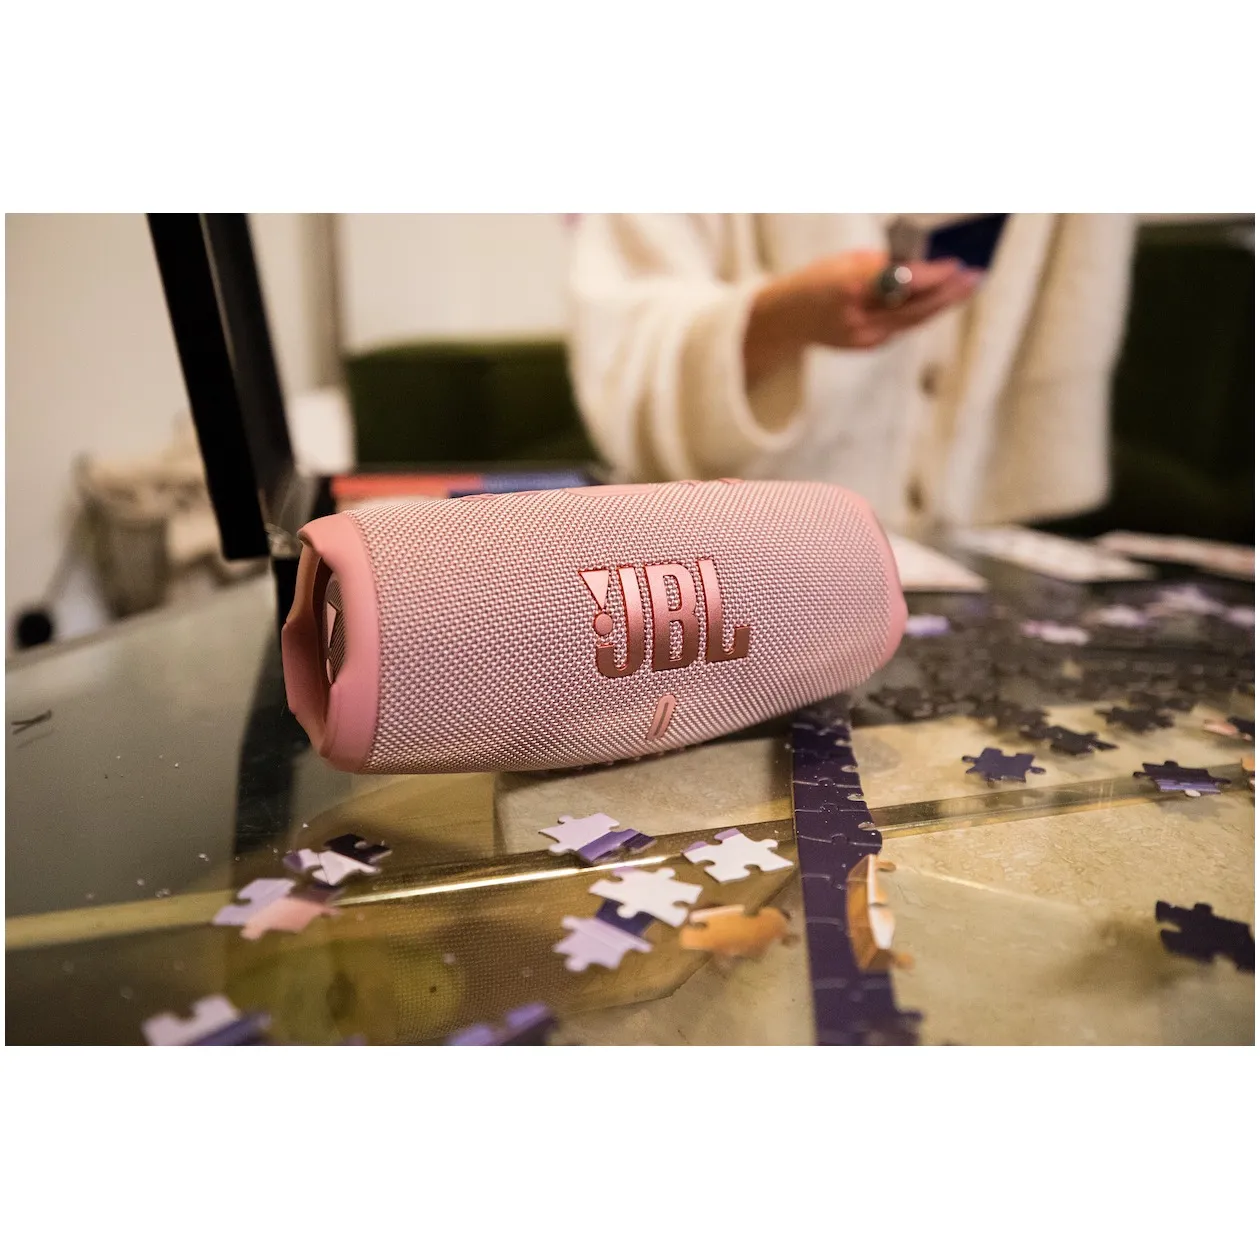 JBL CHARGE 5 Roze